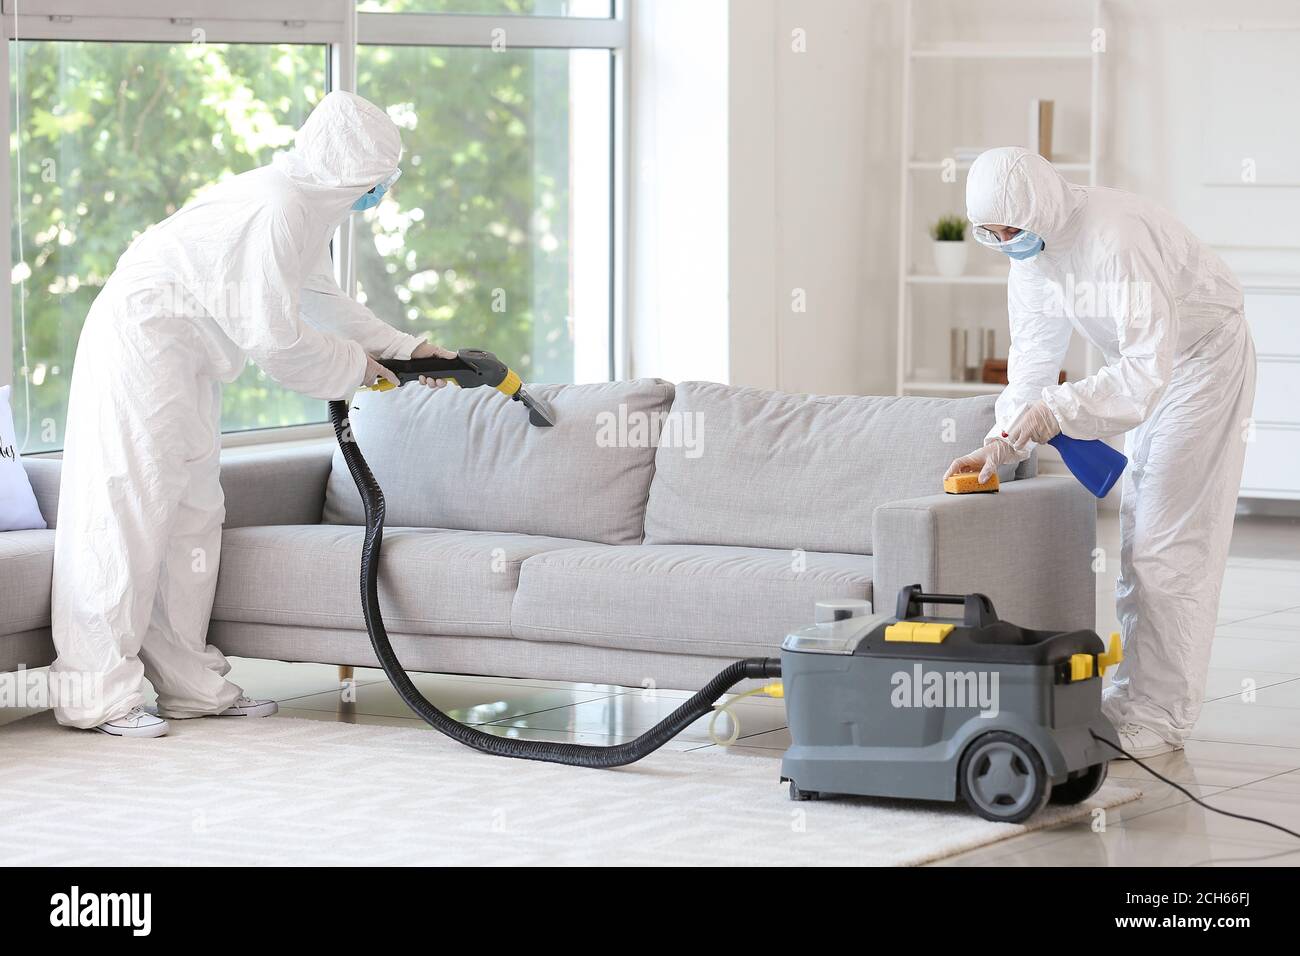 Workers in biohazard costume removing dirt from sofa in house Stock Photo